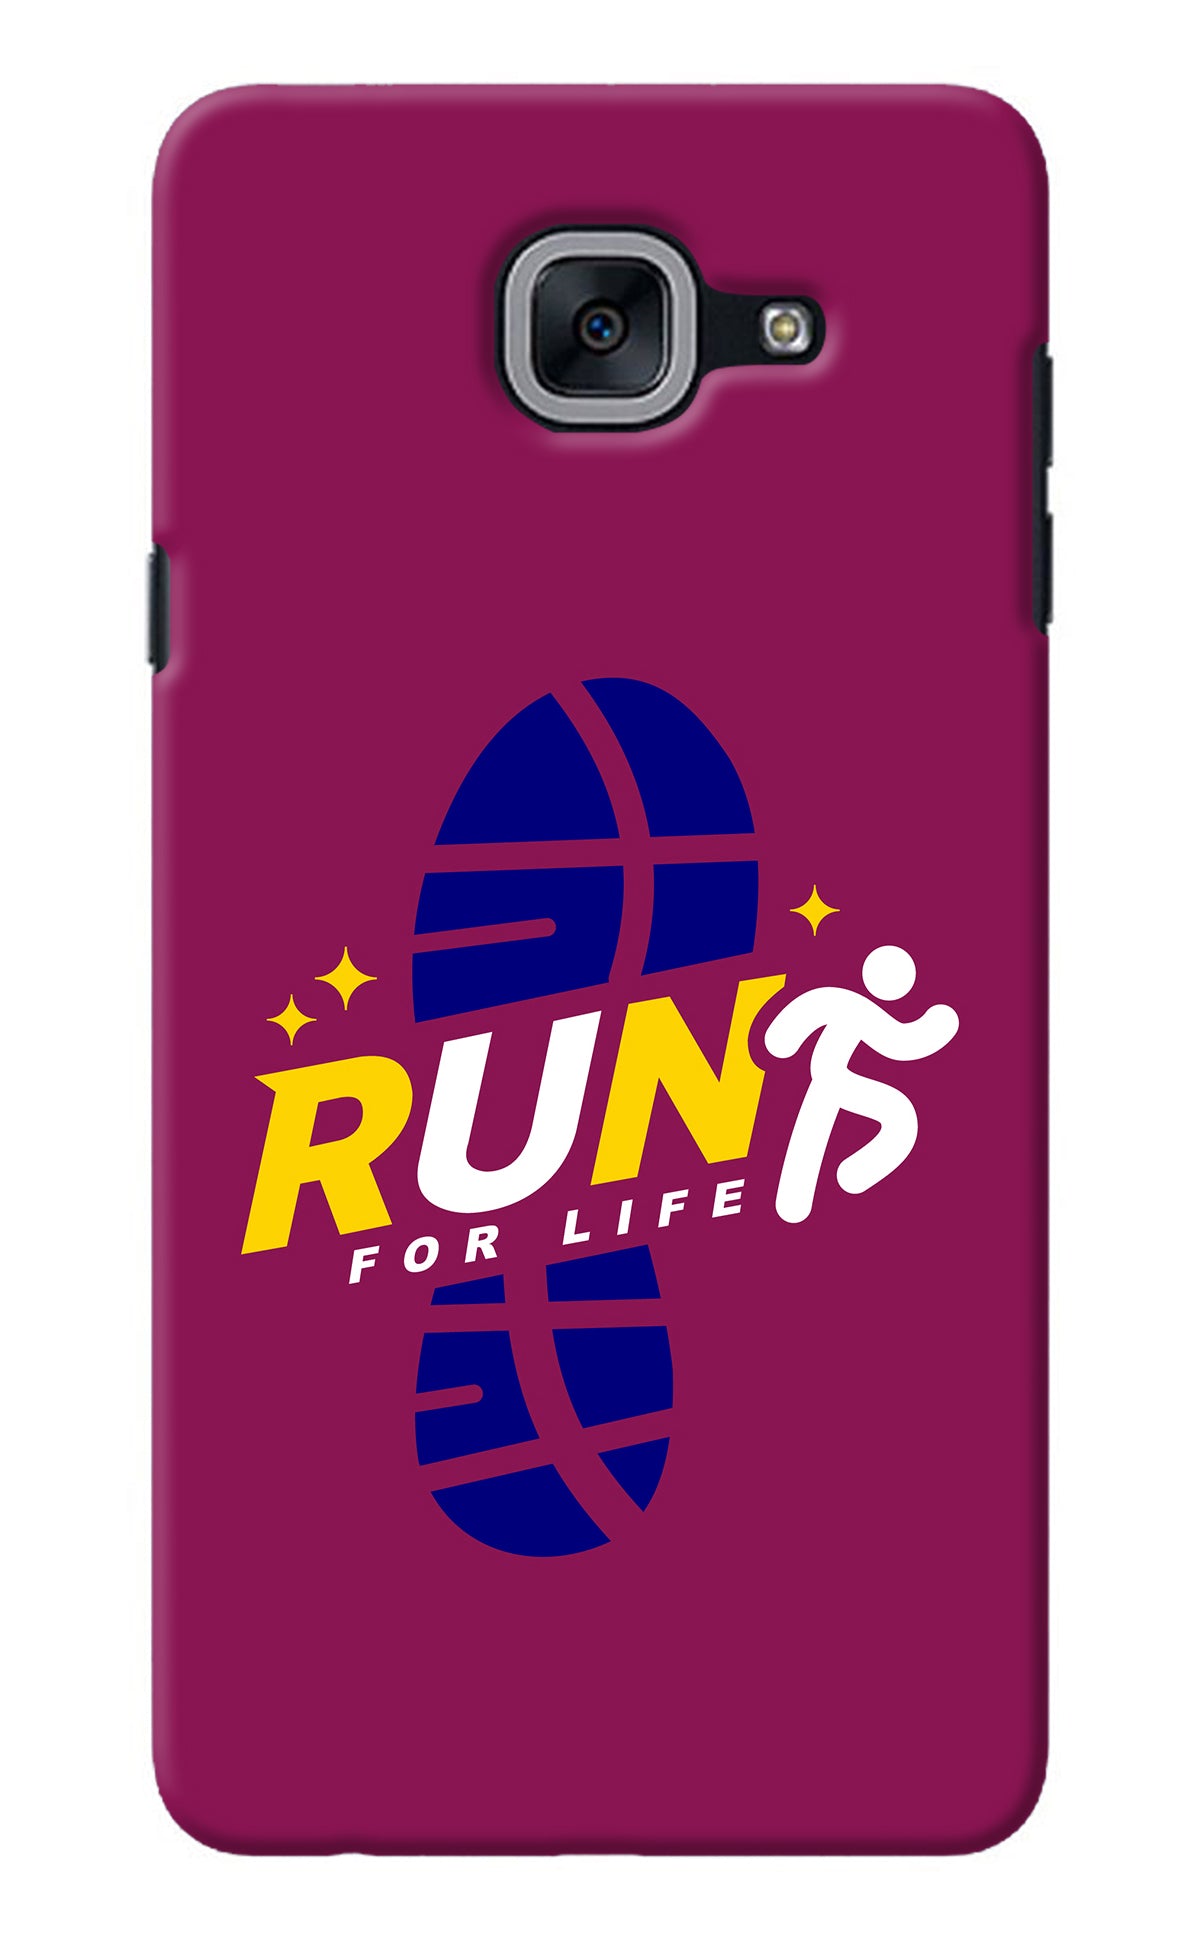 Run for Life Samsung J7 Max Back Cover